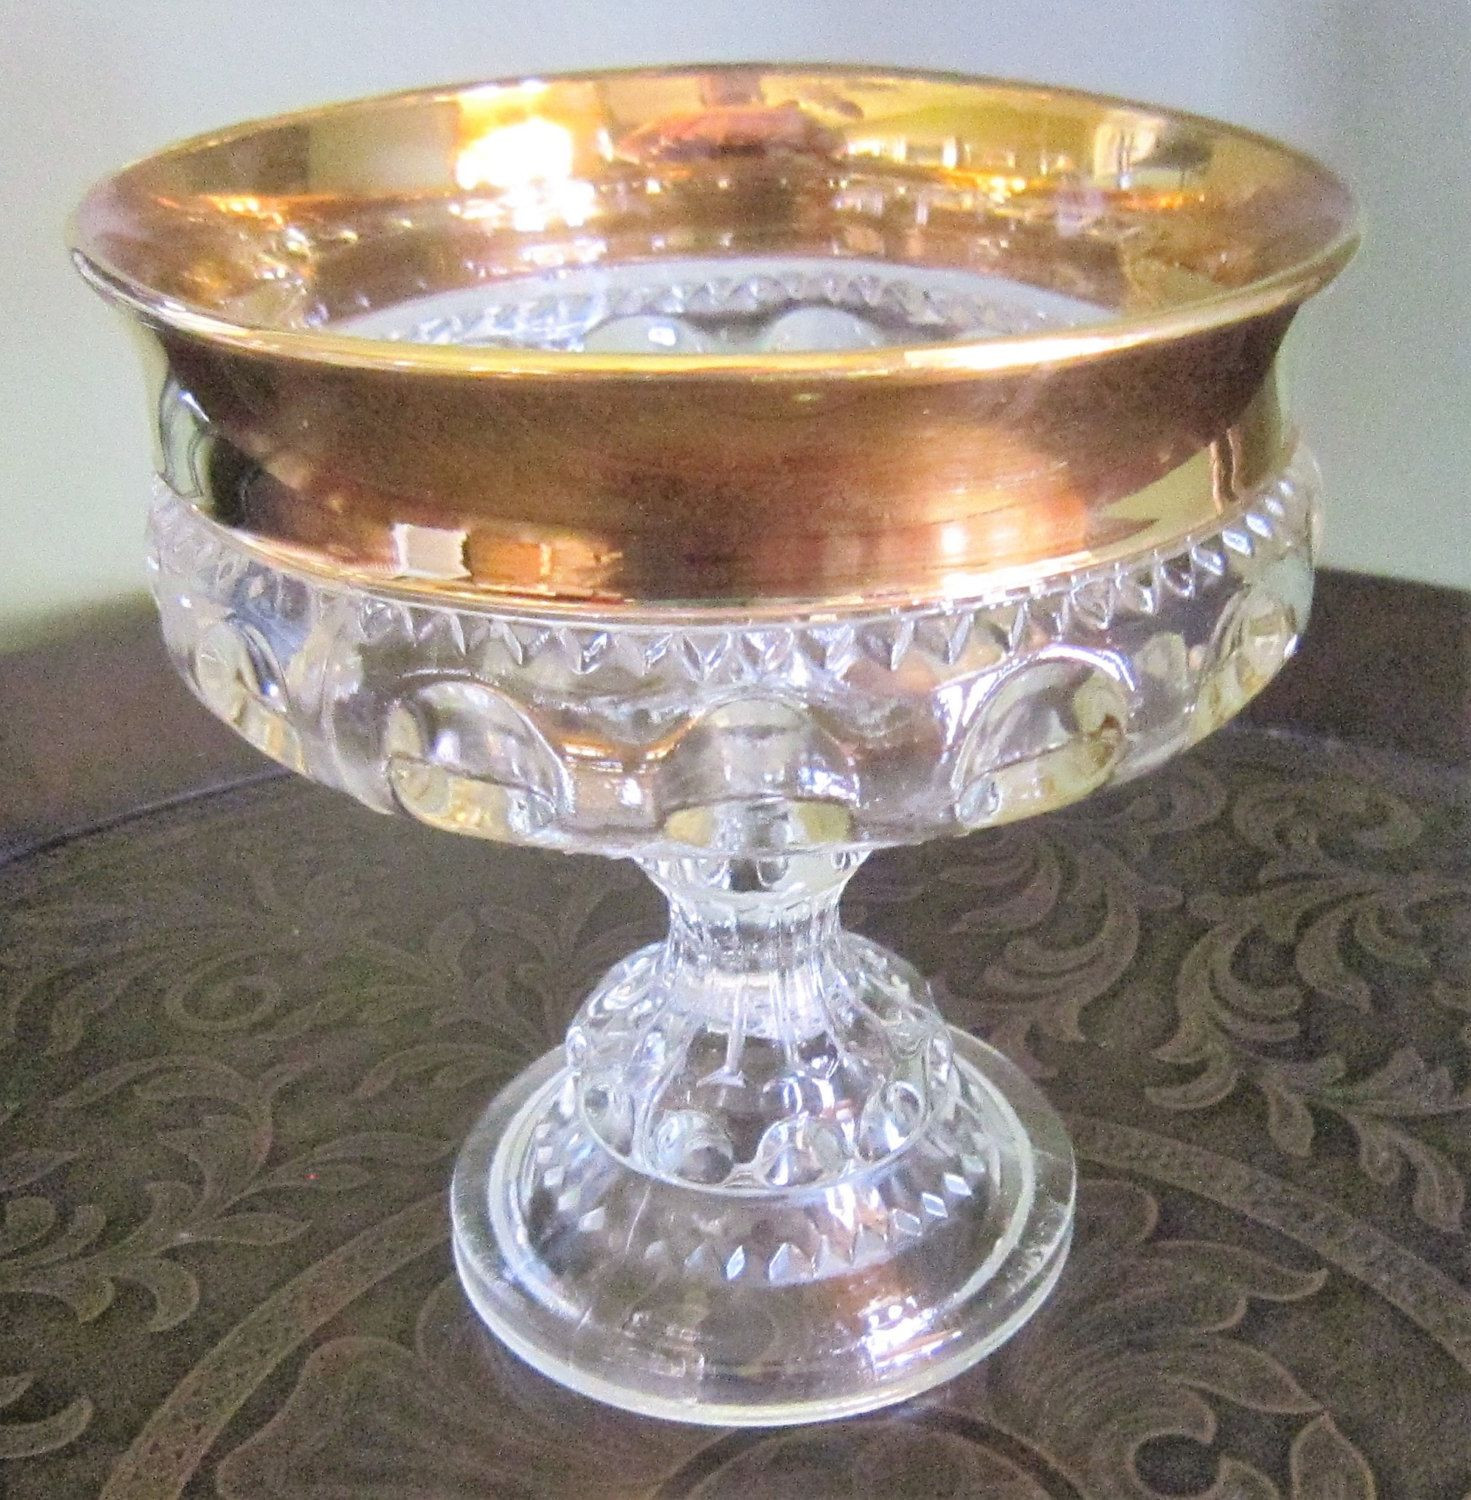 10 Awesome Rose Gold Pedestal Vase 2024 free download rose gold pedestal vase of vintage glass bowl kings crown pedestal bowl footed clear glass intended for vintage glass bowl kings crown pedestal bowl footed clear glass gold trim bowl